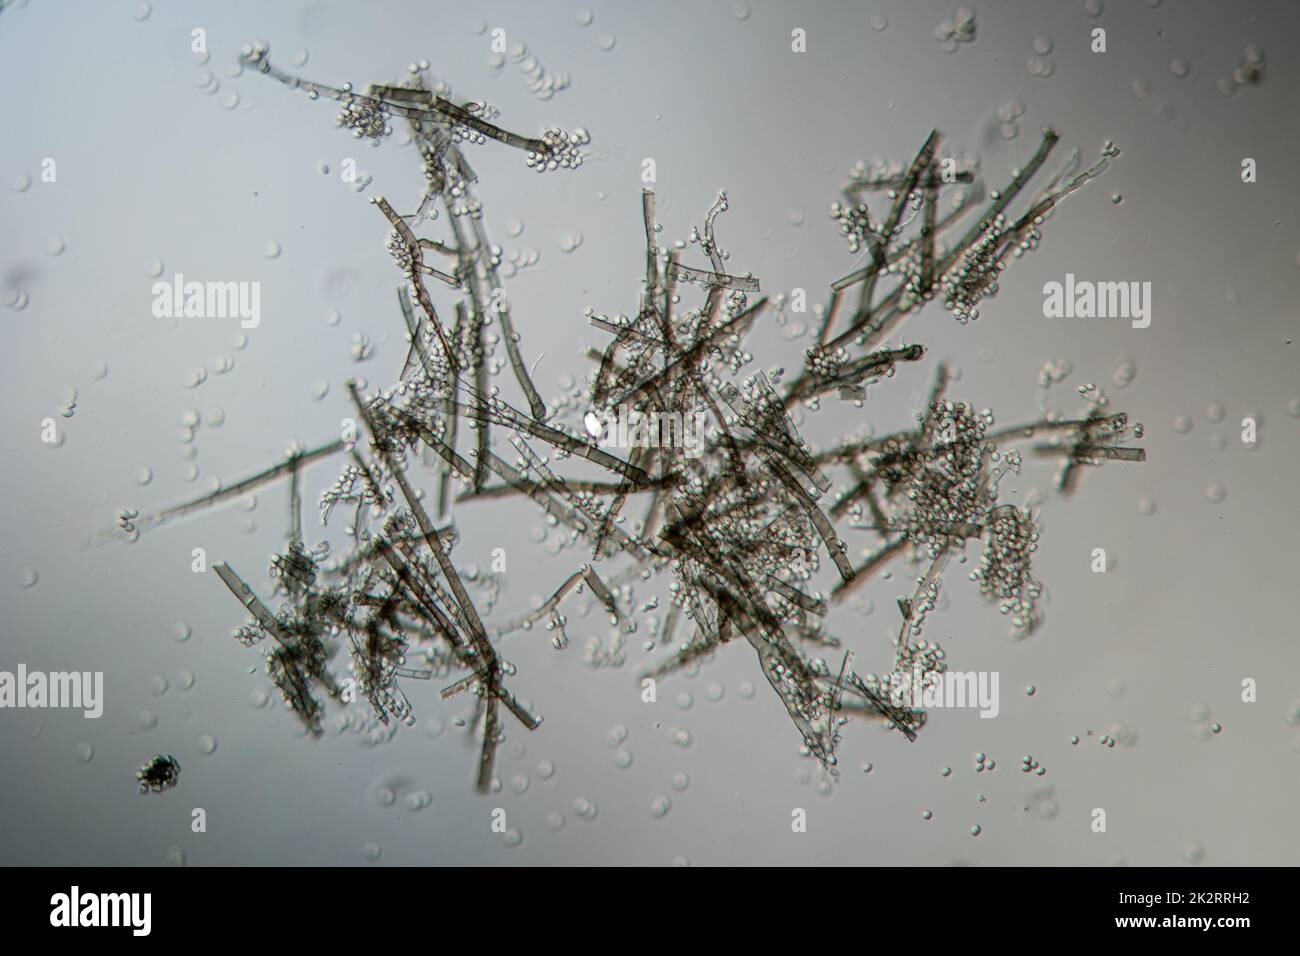 Mold filaments and spores Stock Photo